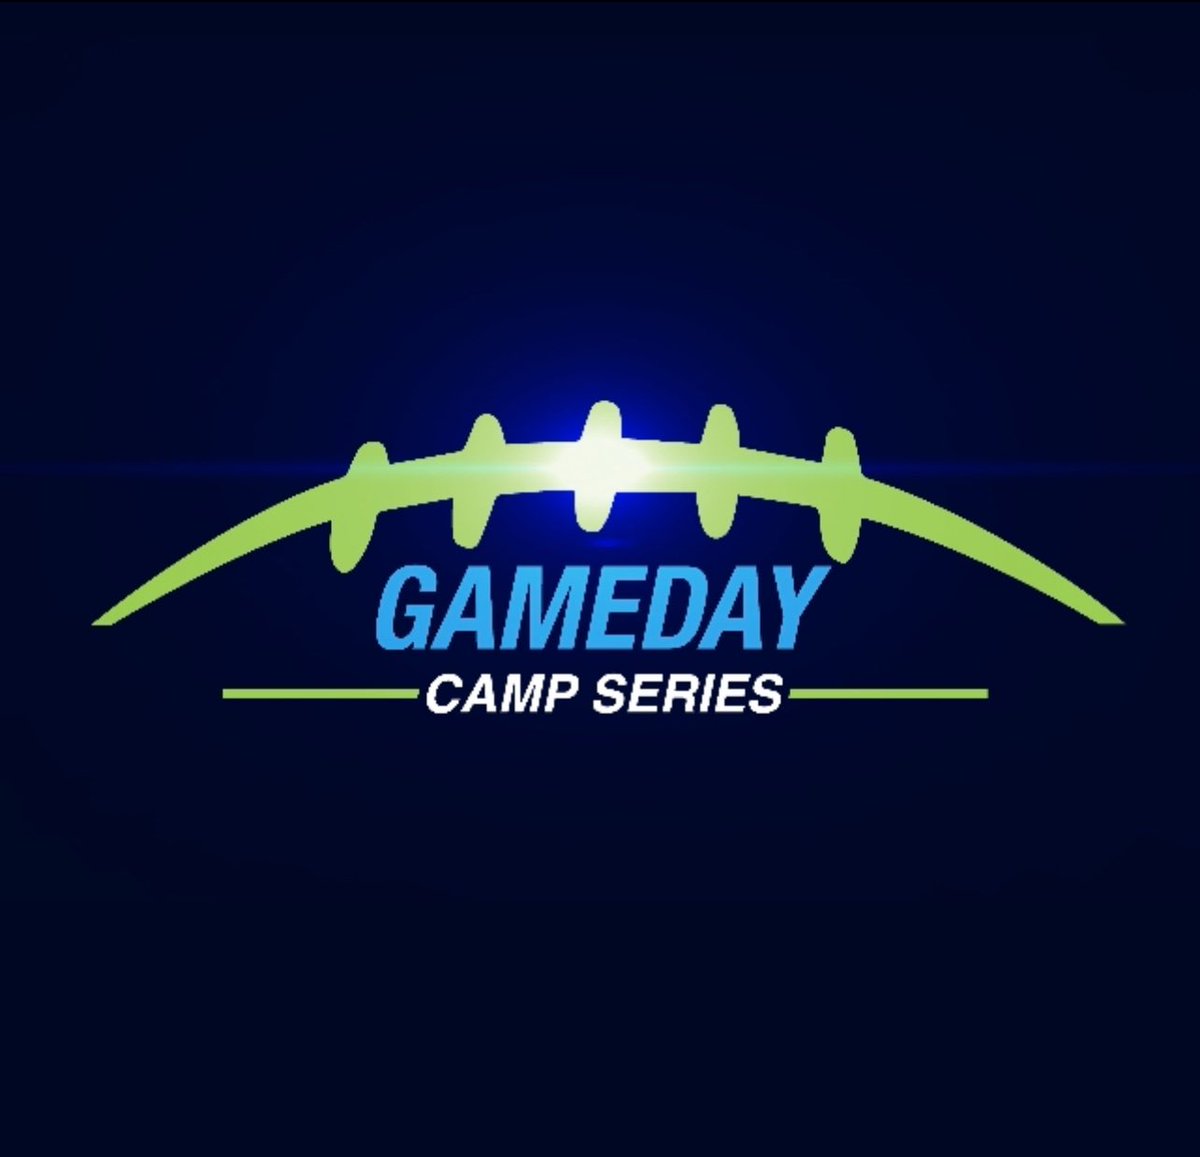 CONGRATULATIONS TO ALL THE GAMEDAY CAMP SERIES MVP’s I WILL PUT THESE MVP’s UP AGAINST ANY PLAYER IN THE COUNTRY POSITIONALLY AND THEY WILL SHINE‼️ QB Elliott Murphy 2026 @ElliottMurphy07 OL Markus Hopson 2025 @markus_hopson LB Joshua Jackson 2025 @JoshuaJ2445 DL Izayiah